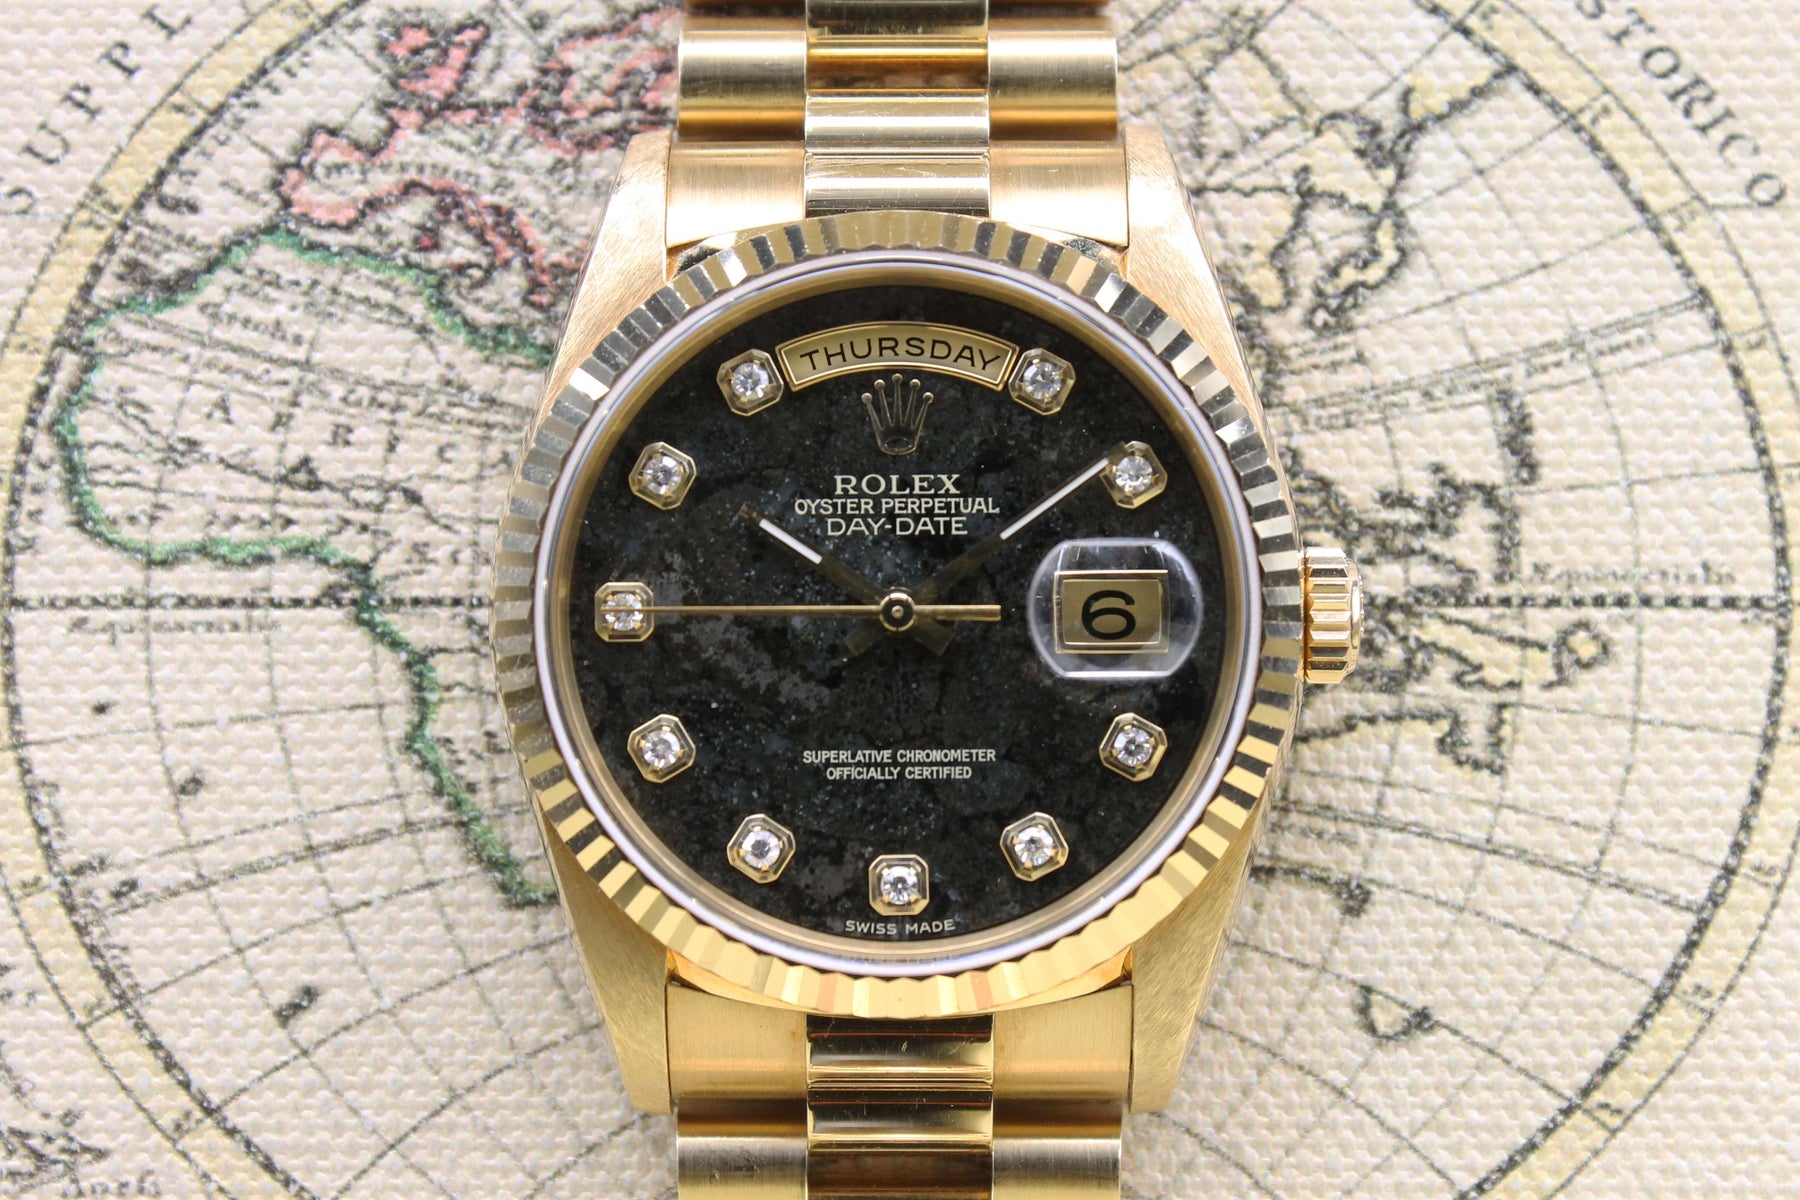 1991 Rolex Day Date Pyrite Diamond Dial Ref. 18238 (with Box & Papers)